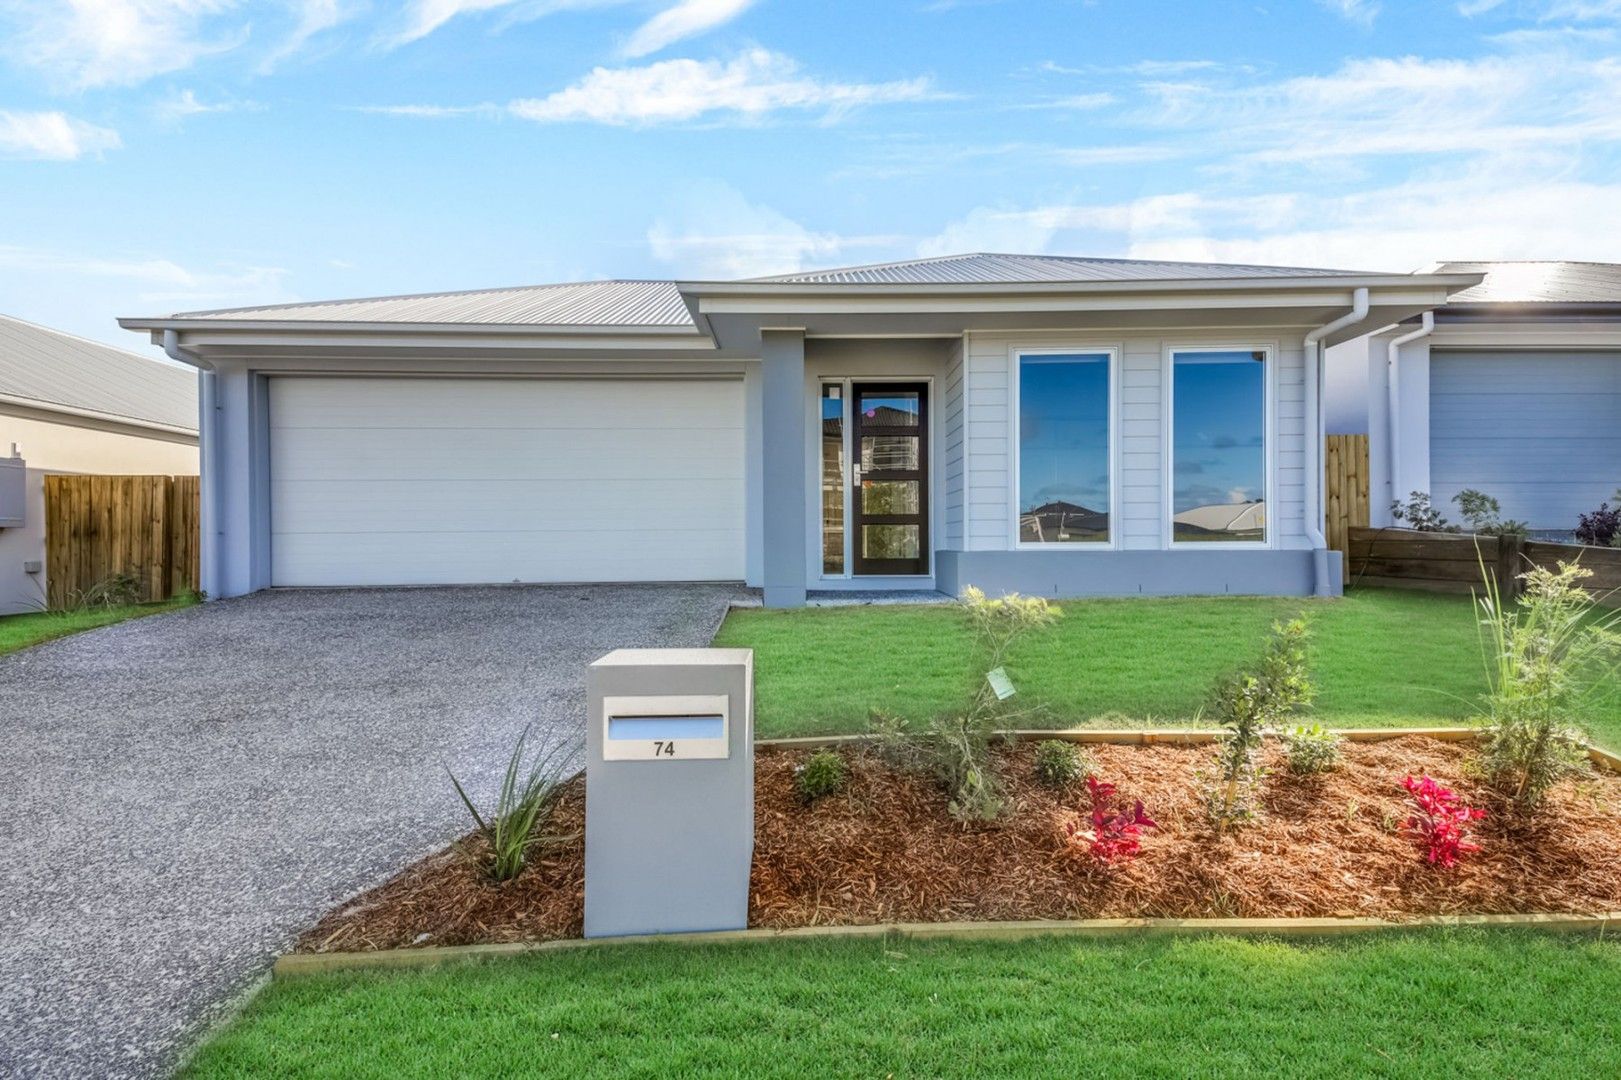 4 bedrooms New House & Land in 74 Eagle Street BURPENGARY EAST QLD, 4505